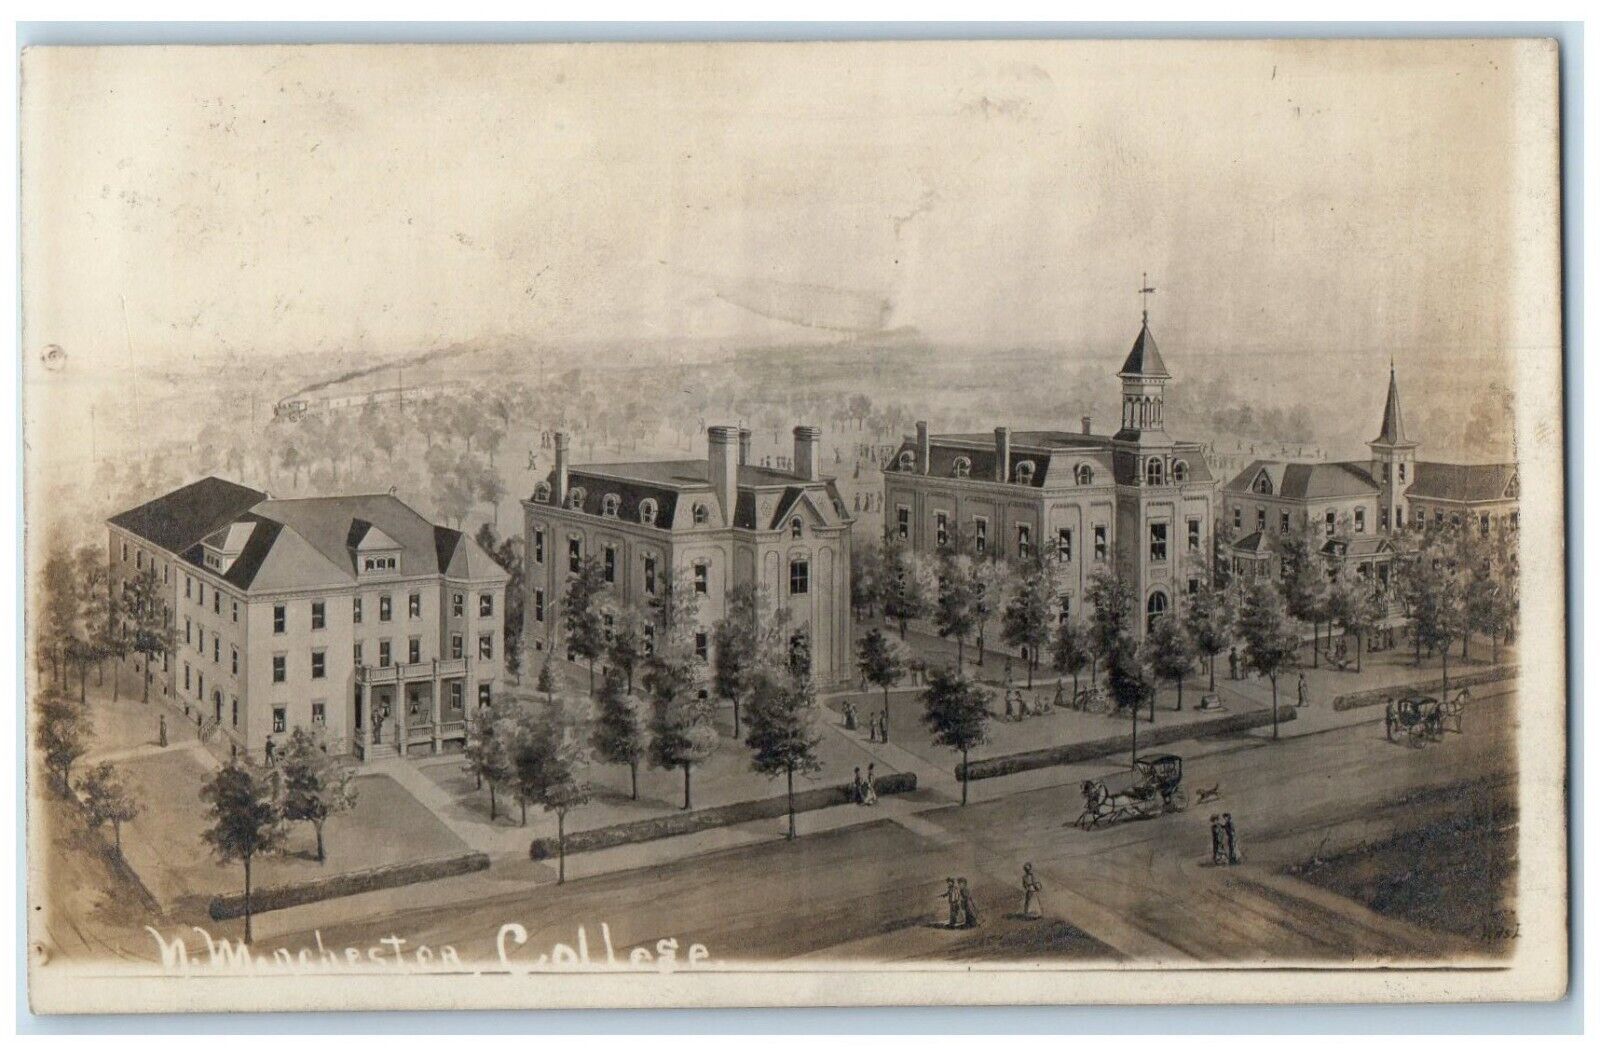 c1910's North Manchester College Manchester Indiana IN RPPC Photo Postcard